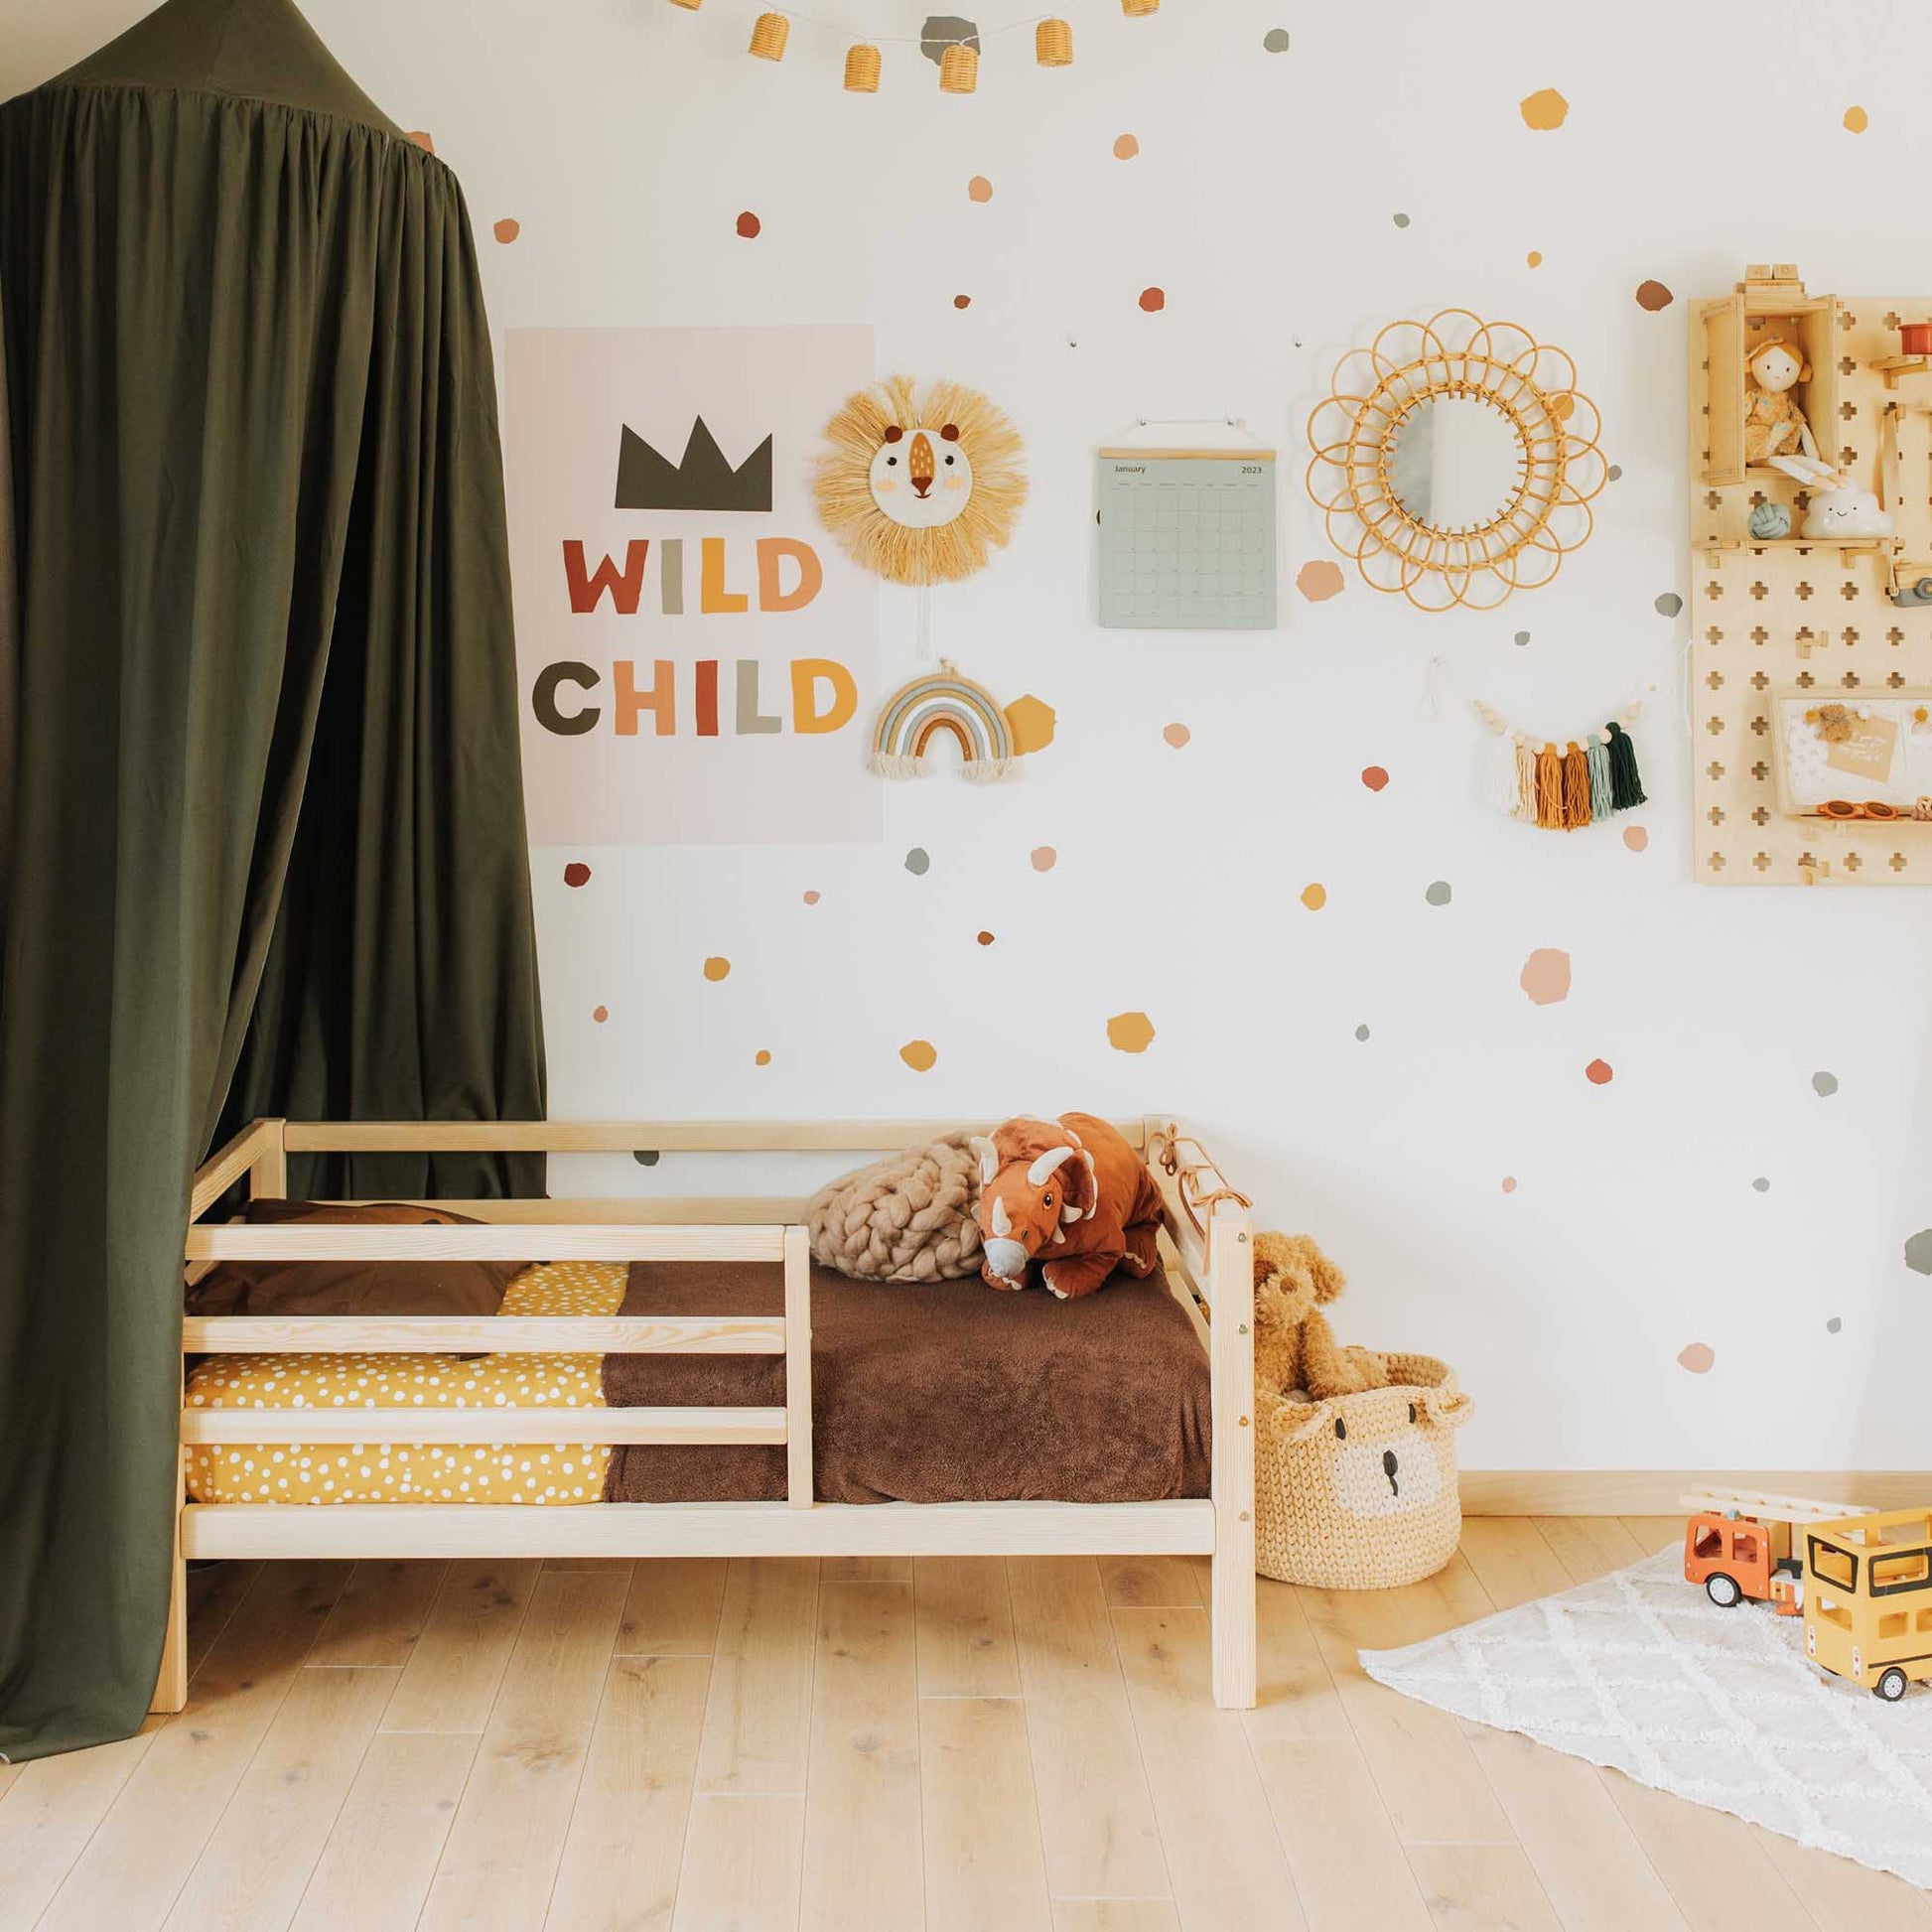 A child's room with a Sweet Home From Wood 2-in-1 transformable kids' bed with a horizontal rail fence, teddy bears, and polka dots.